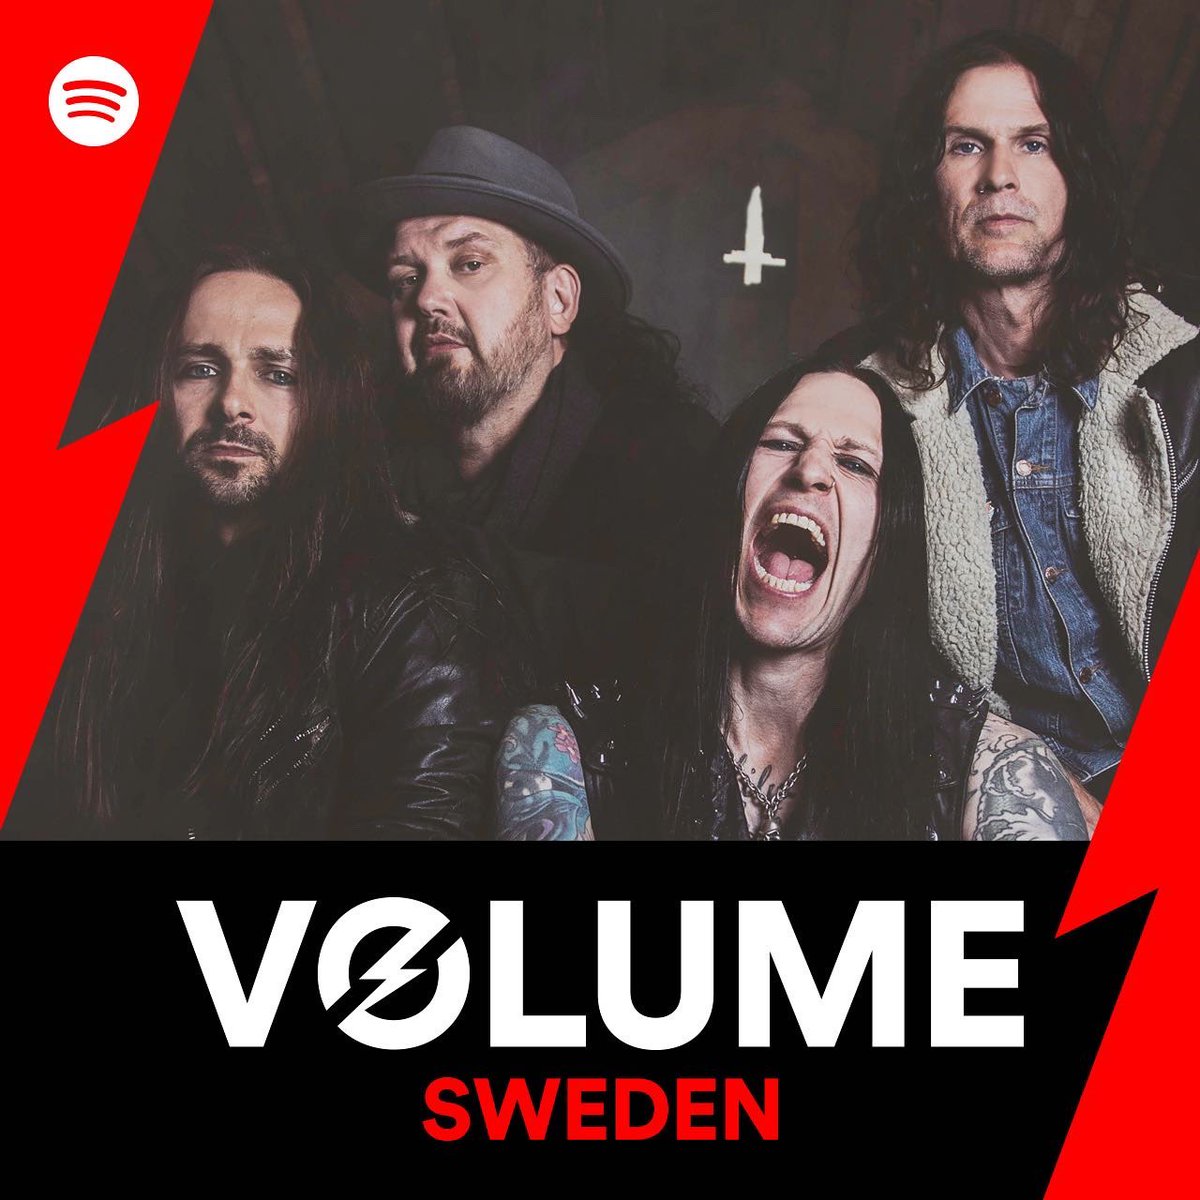 So stoked to be on the cover of the #VolumeSweden playlist with #Abrakadabra as the lead song. Head over to @Spotify and #SpotifySweden and blast it loud!! spoti.fi/36NRkc6